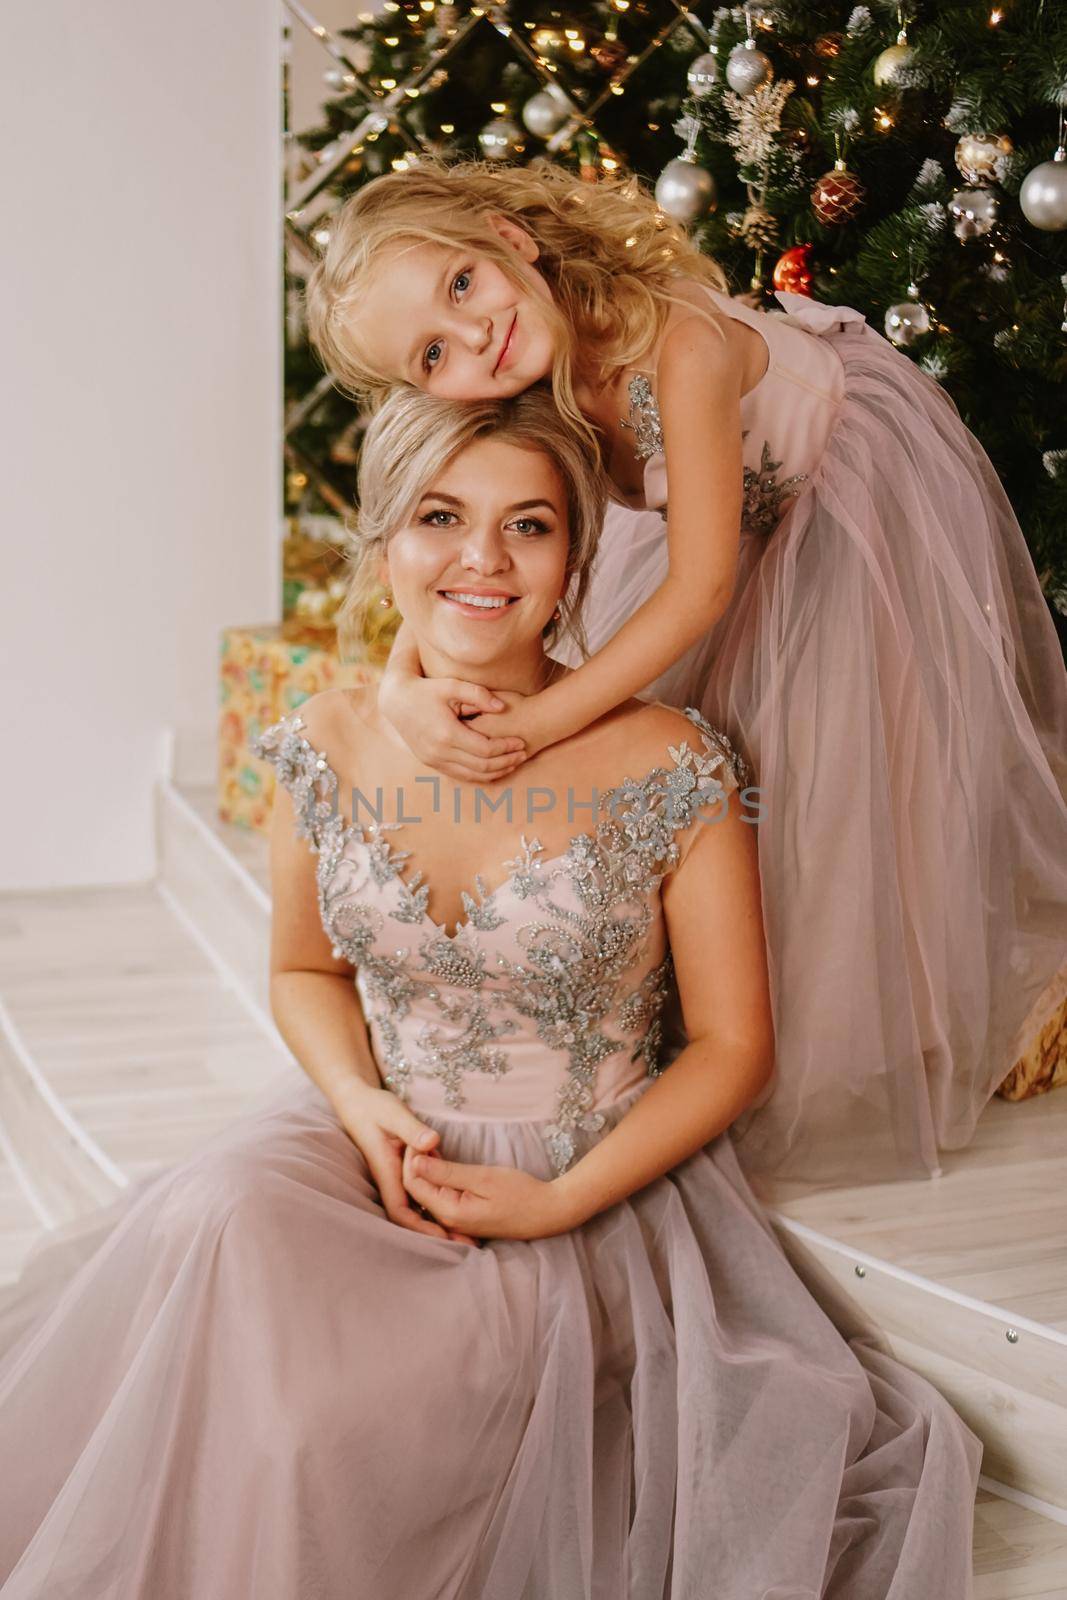 Daughter hugging her mother while sitting at christmas tree with gift boxes by natali_brill